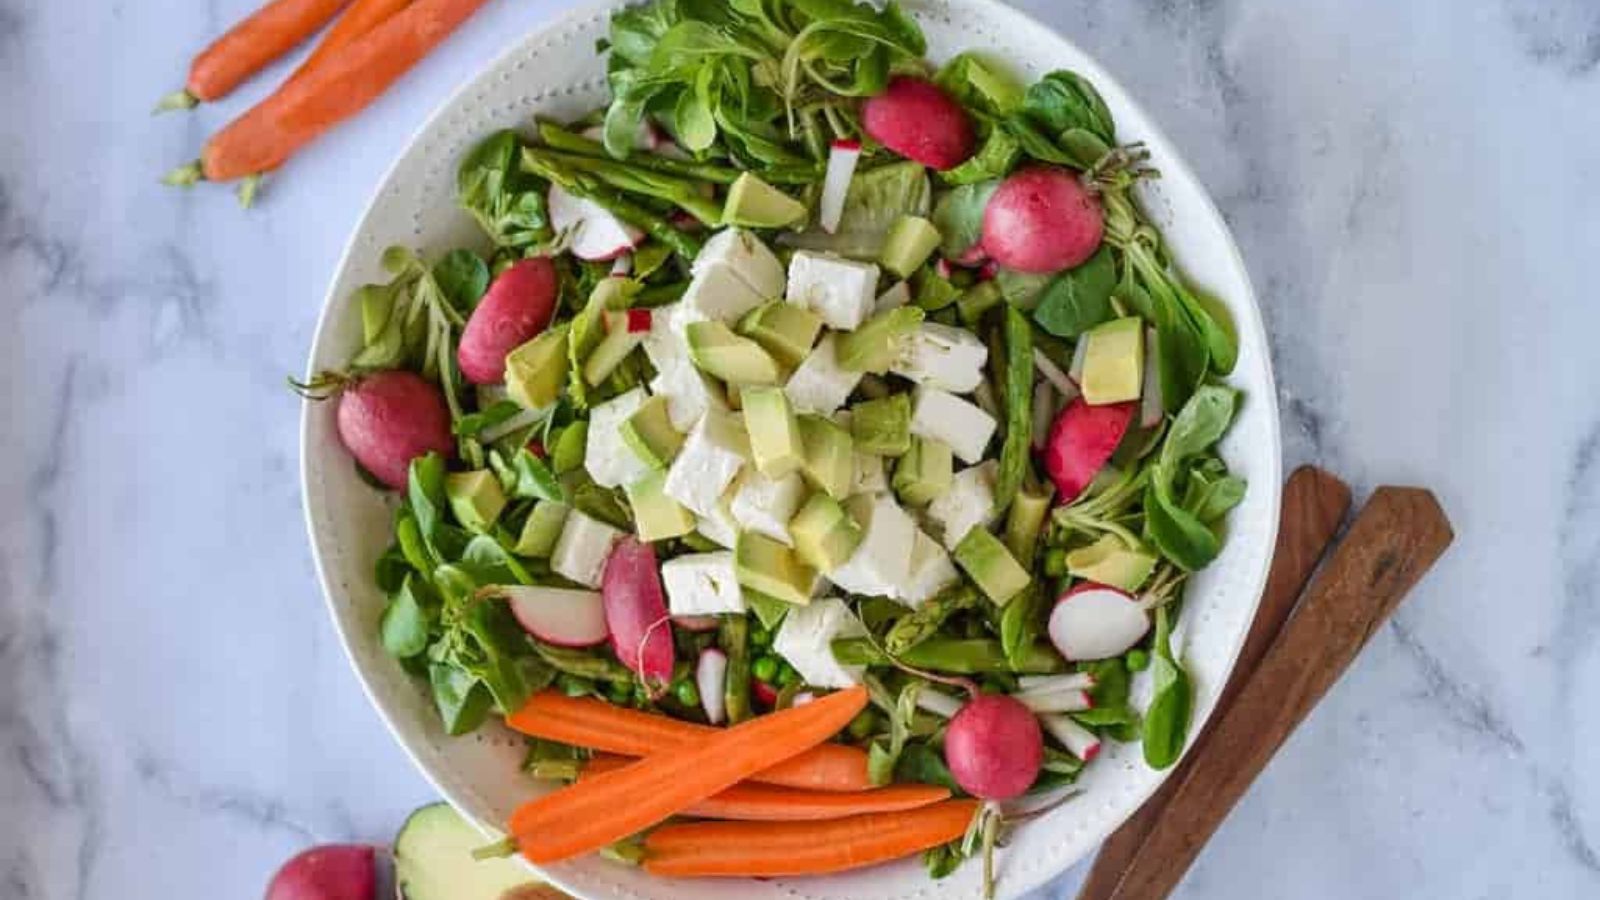 A green salad with radish, asparagus, and carrots. 